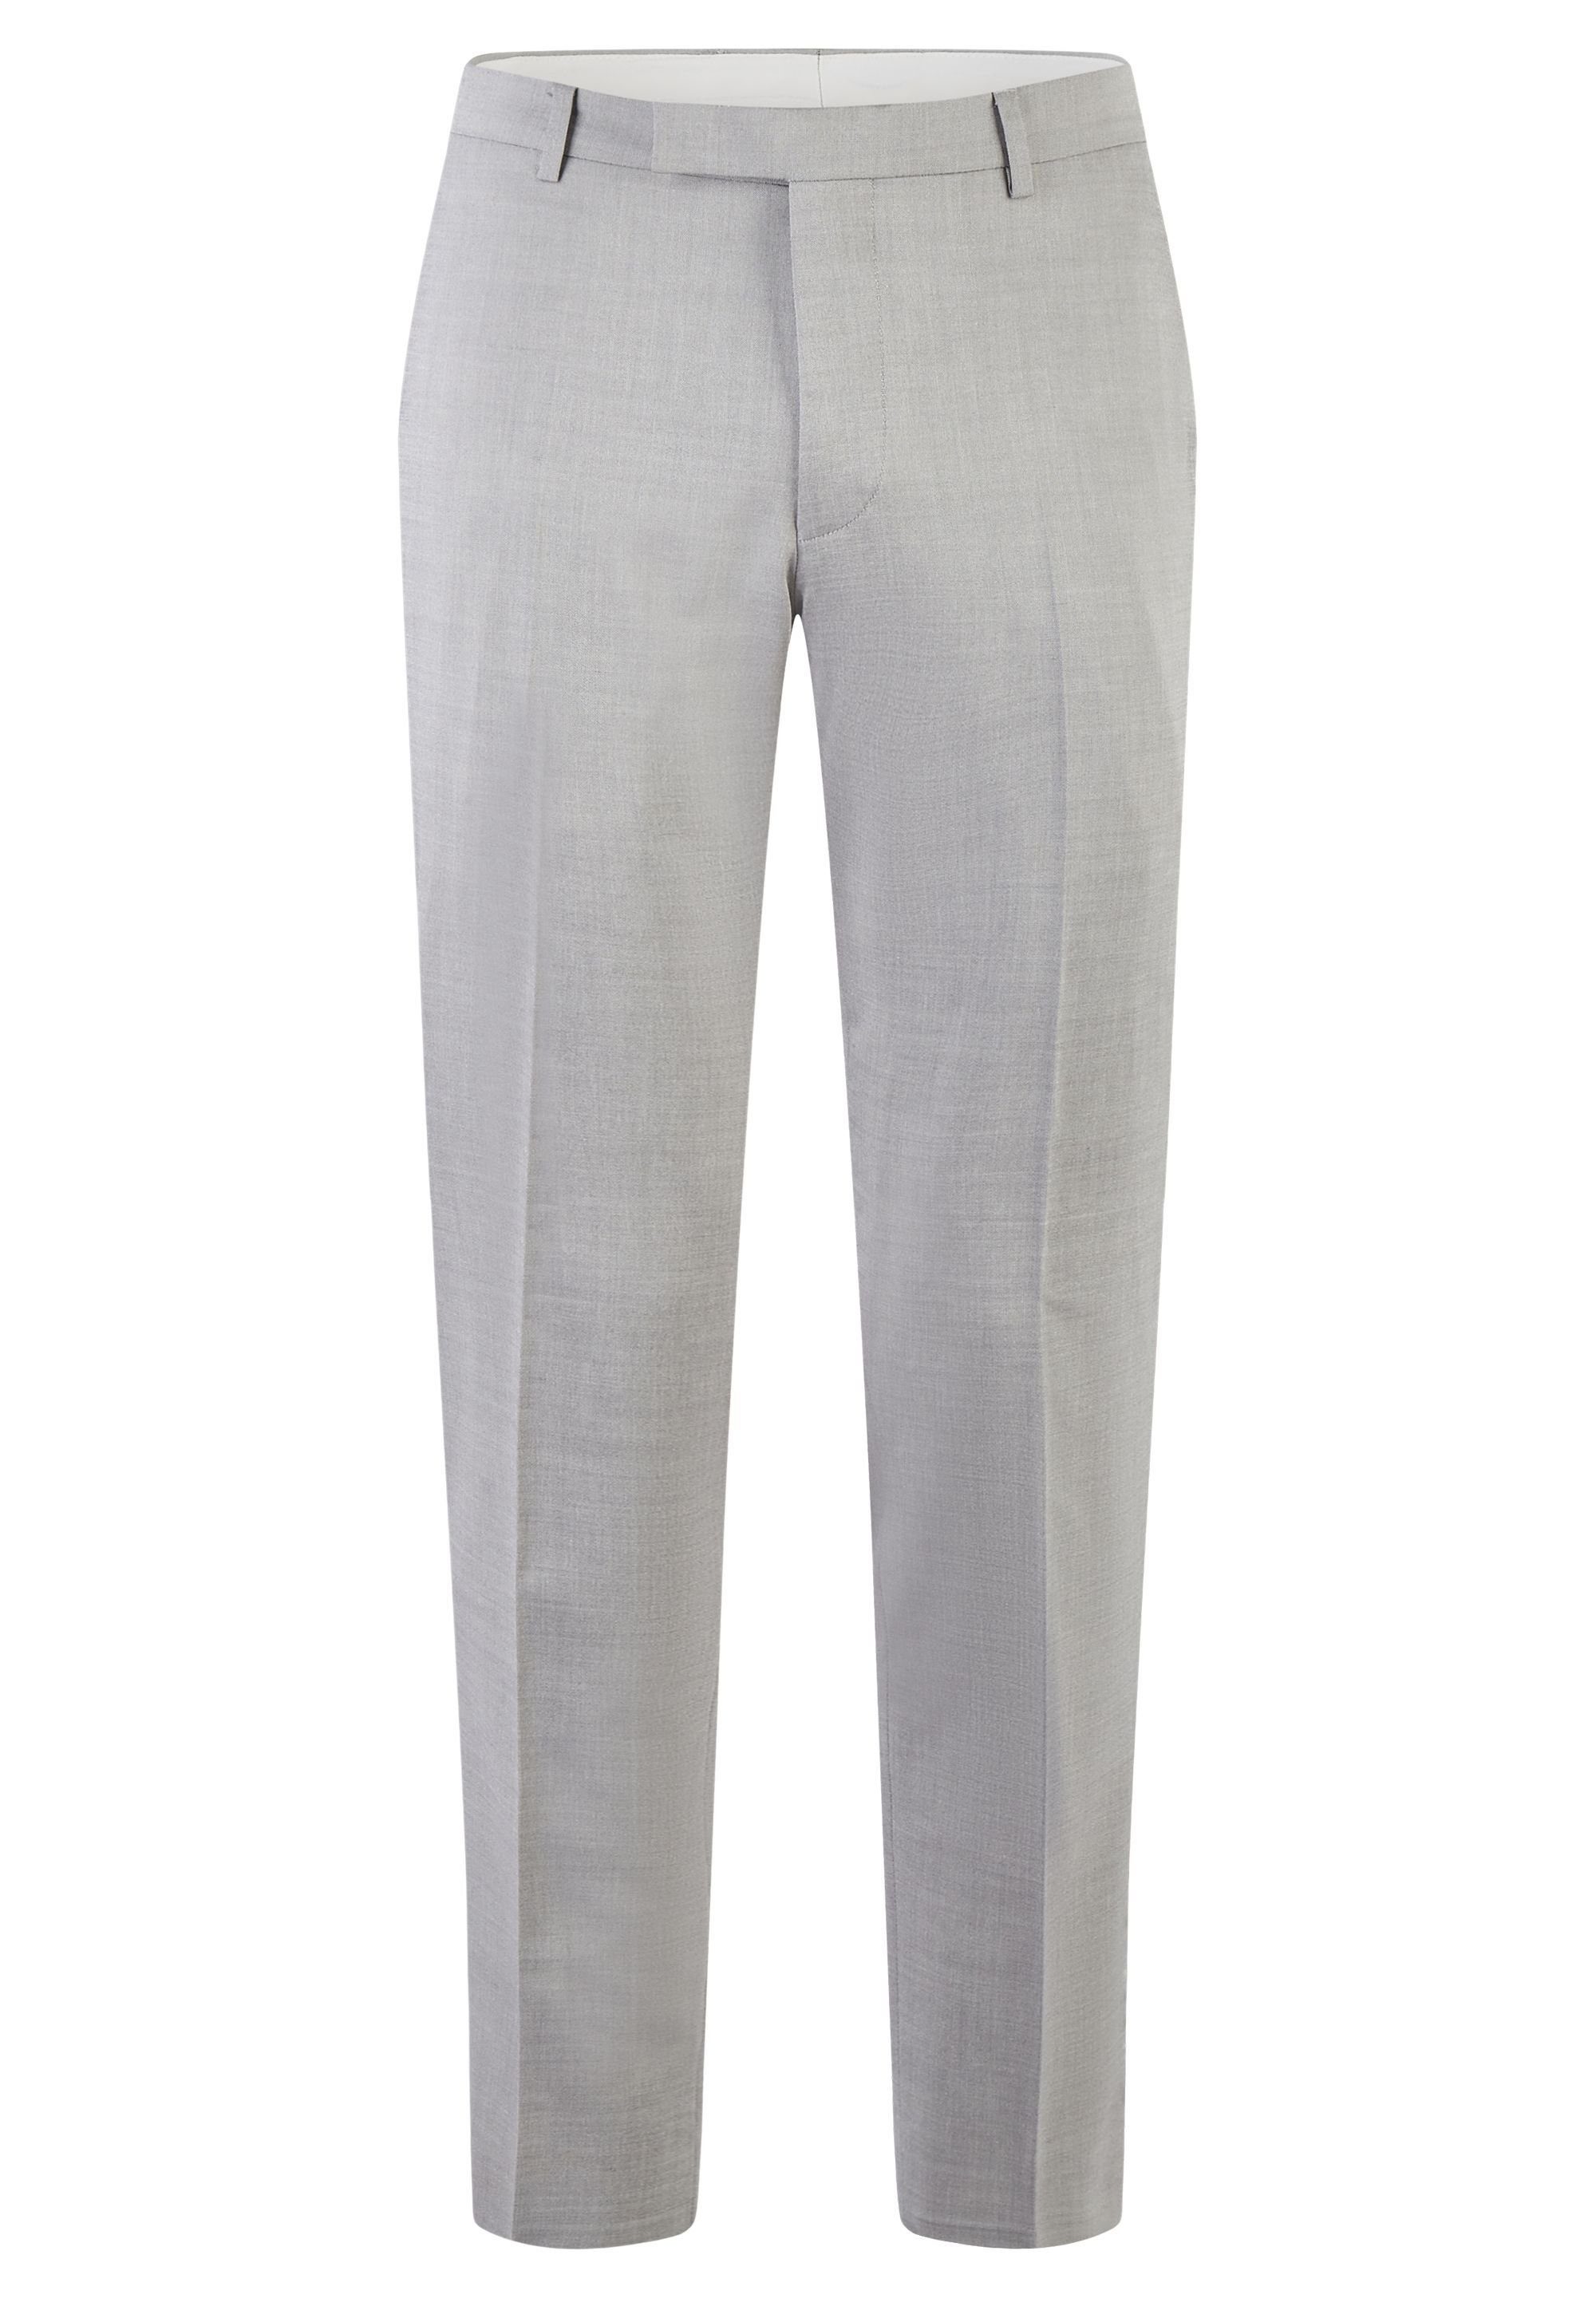 Anzughose PARIS grey mit Pin-Ponit-Muster HECHTER